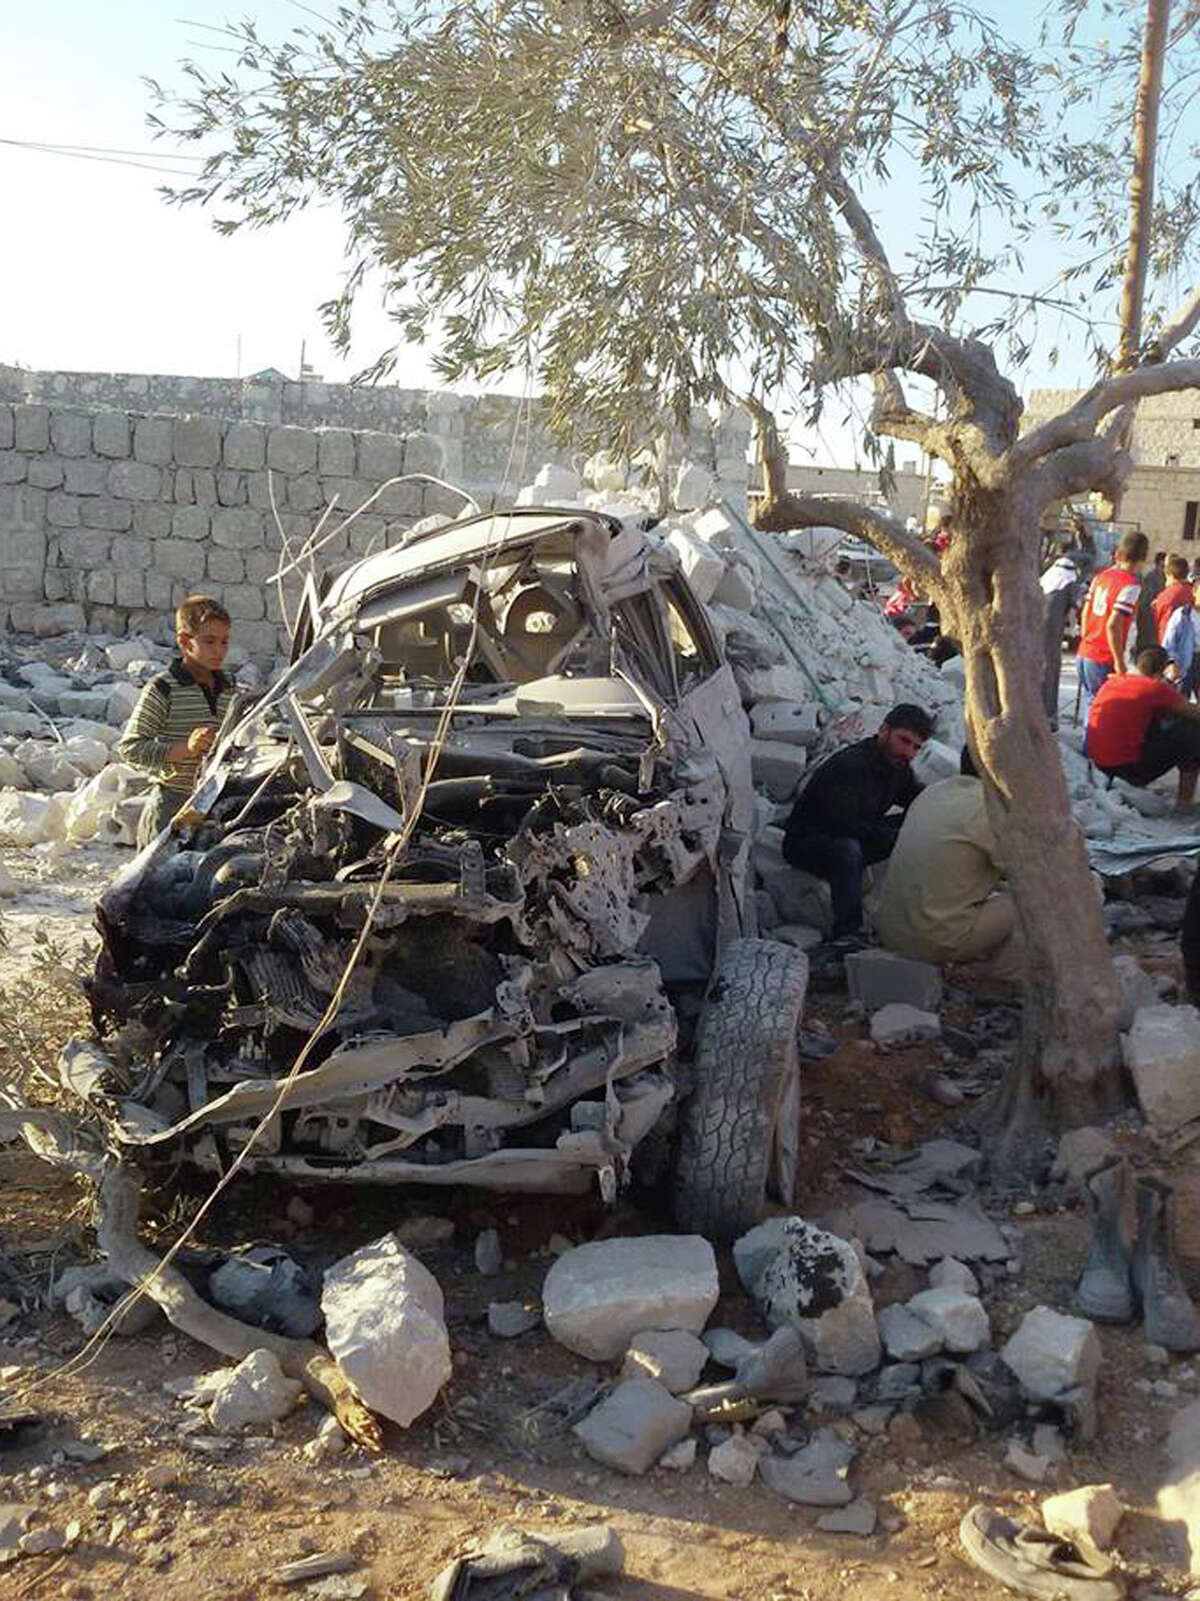 This photo provided by an anti-Bashar Assad activist group Edlib News Network (ENN), which has been authenticated based on its contents and other AP reporting, shows a Syrian boy, left, looking at a destroyed car that activists say was targeted by the coalition airstrikes, in the village of Kfar Derian, a base for the al-Qaida-linked Nusra Front, a rival of the Islamic State group, between the northern province of Aleppo and Idlib, Syria, Tuesday Sept. 23, 2014. Syria said Tuesday that Washington informed President Bashar Assad's government of imminent U.S. airstrikes against the Islamic State group, hours before an American-led military coalition pounded the extremists' strongholds across northern and eastern Syria. (AP Photo/Edlib News Network ENN)